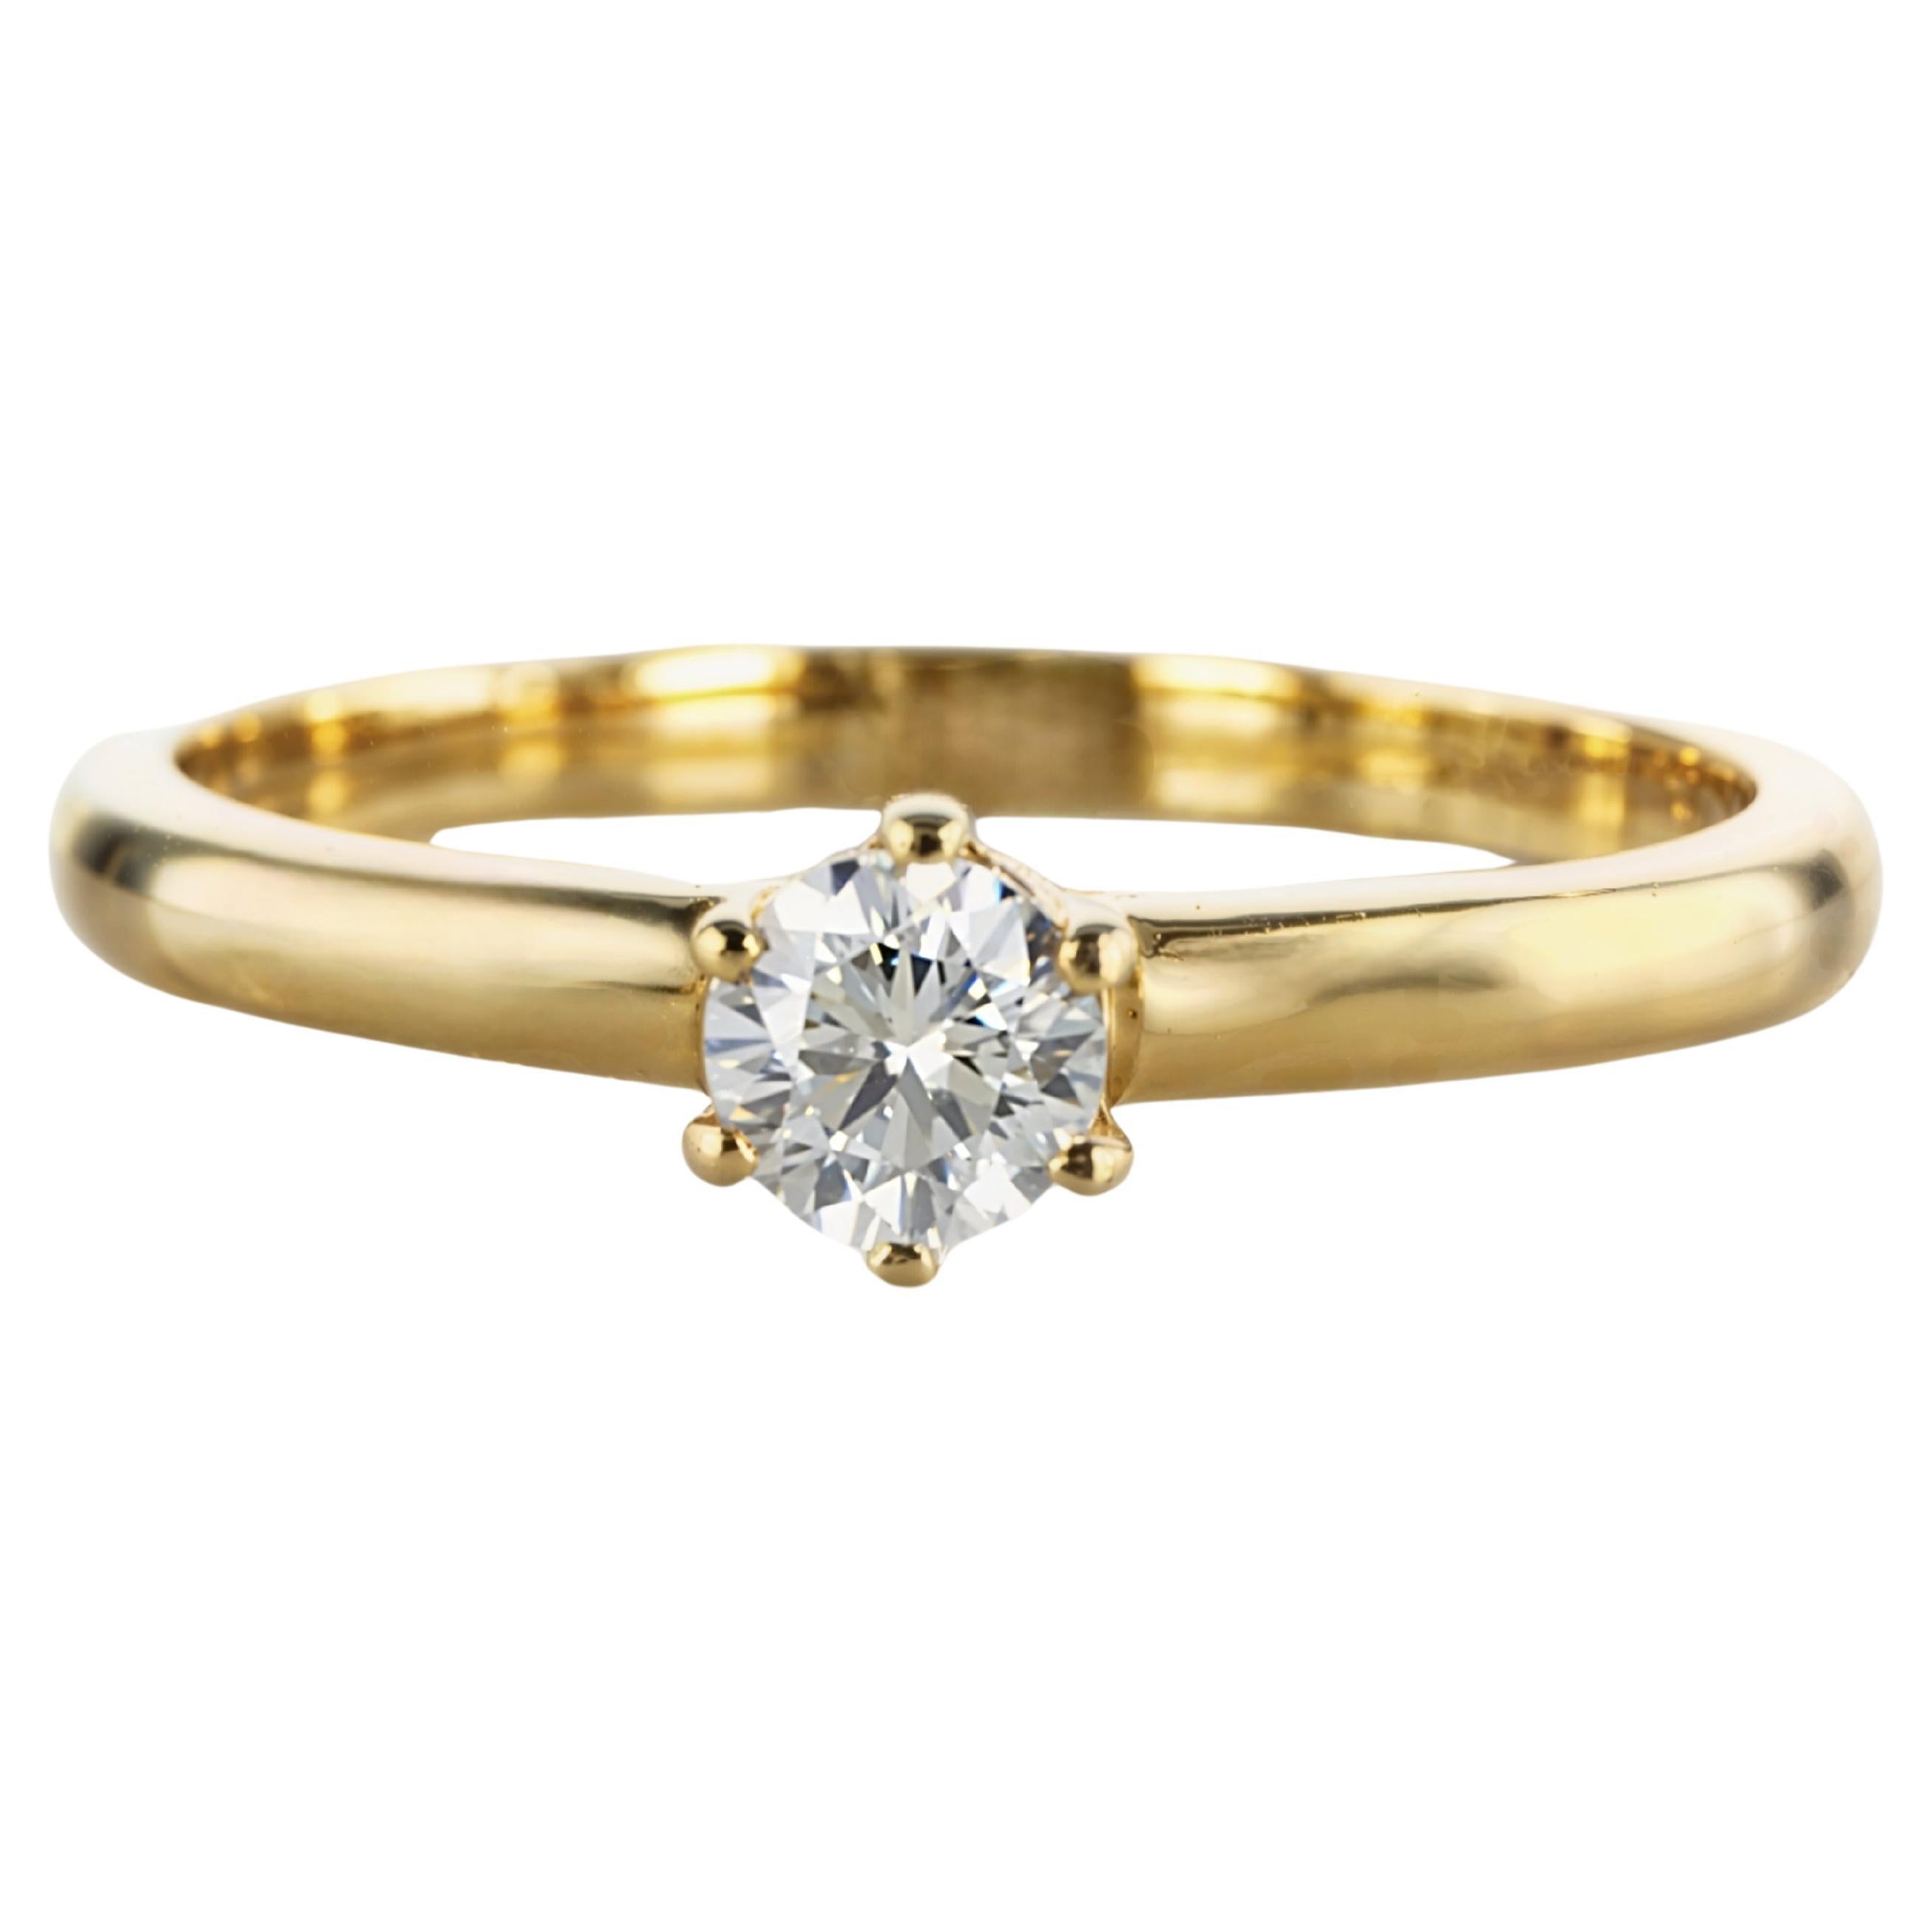 For Sale:  Stunning Classic 0.25 Carat Diamond Solitaire Ring in 14K Gold